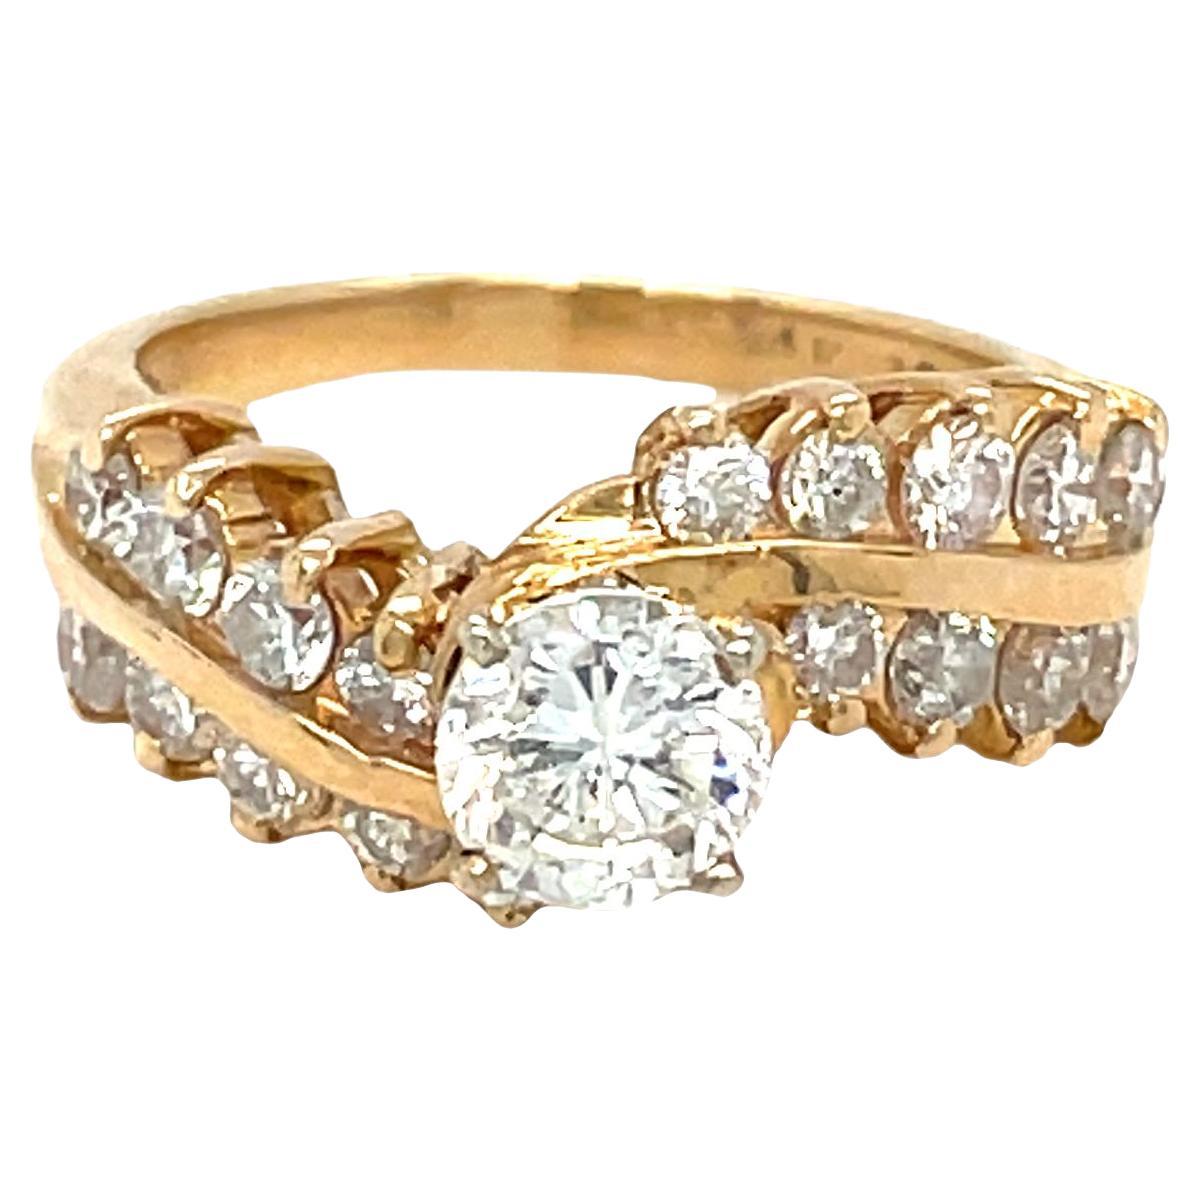 Stunning bypass diamond engagement ring captures sophistication and elegance. The curving twisted shank adding a touch of uniqueness and symbolizing the journey of love. Crafted in 14K yellow gold, this beautiful ring features four prong-set round